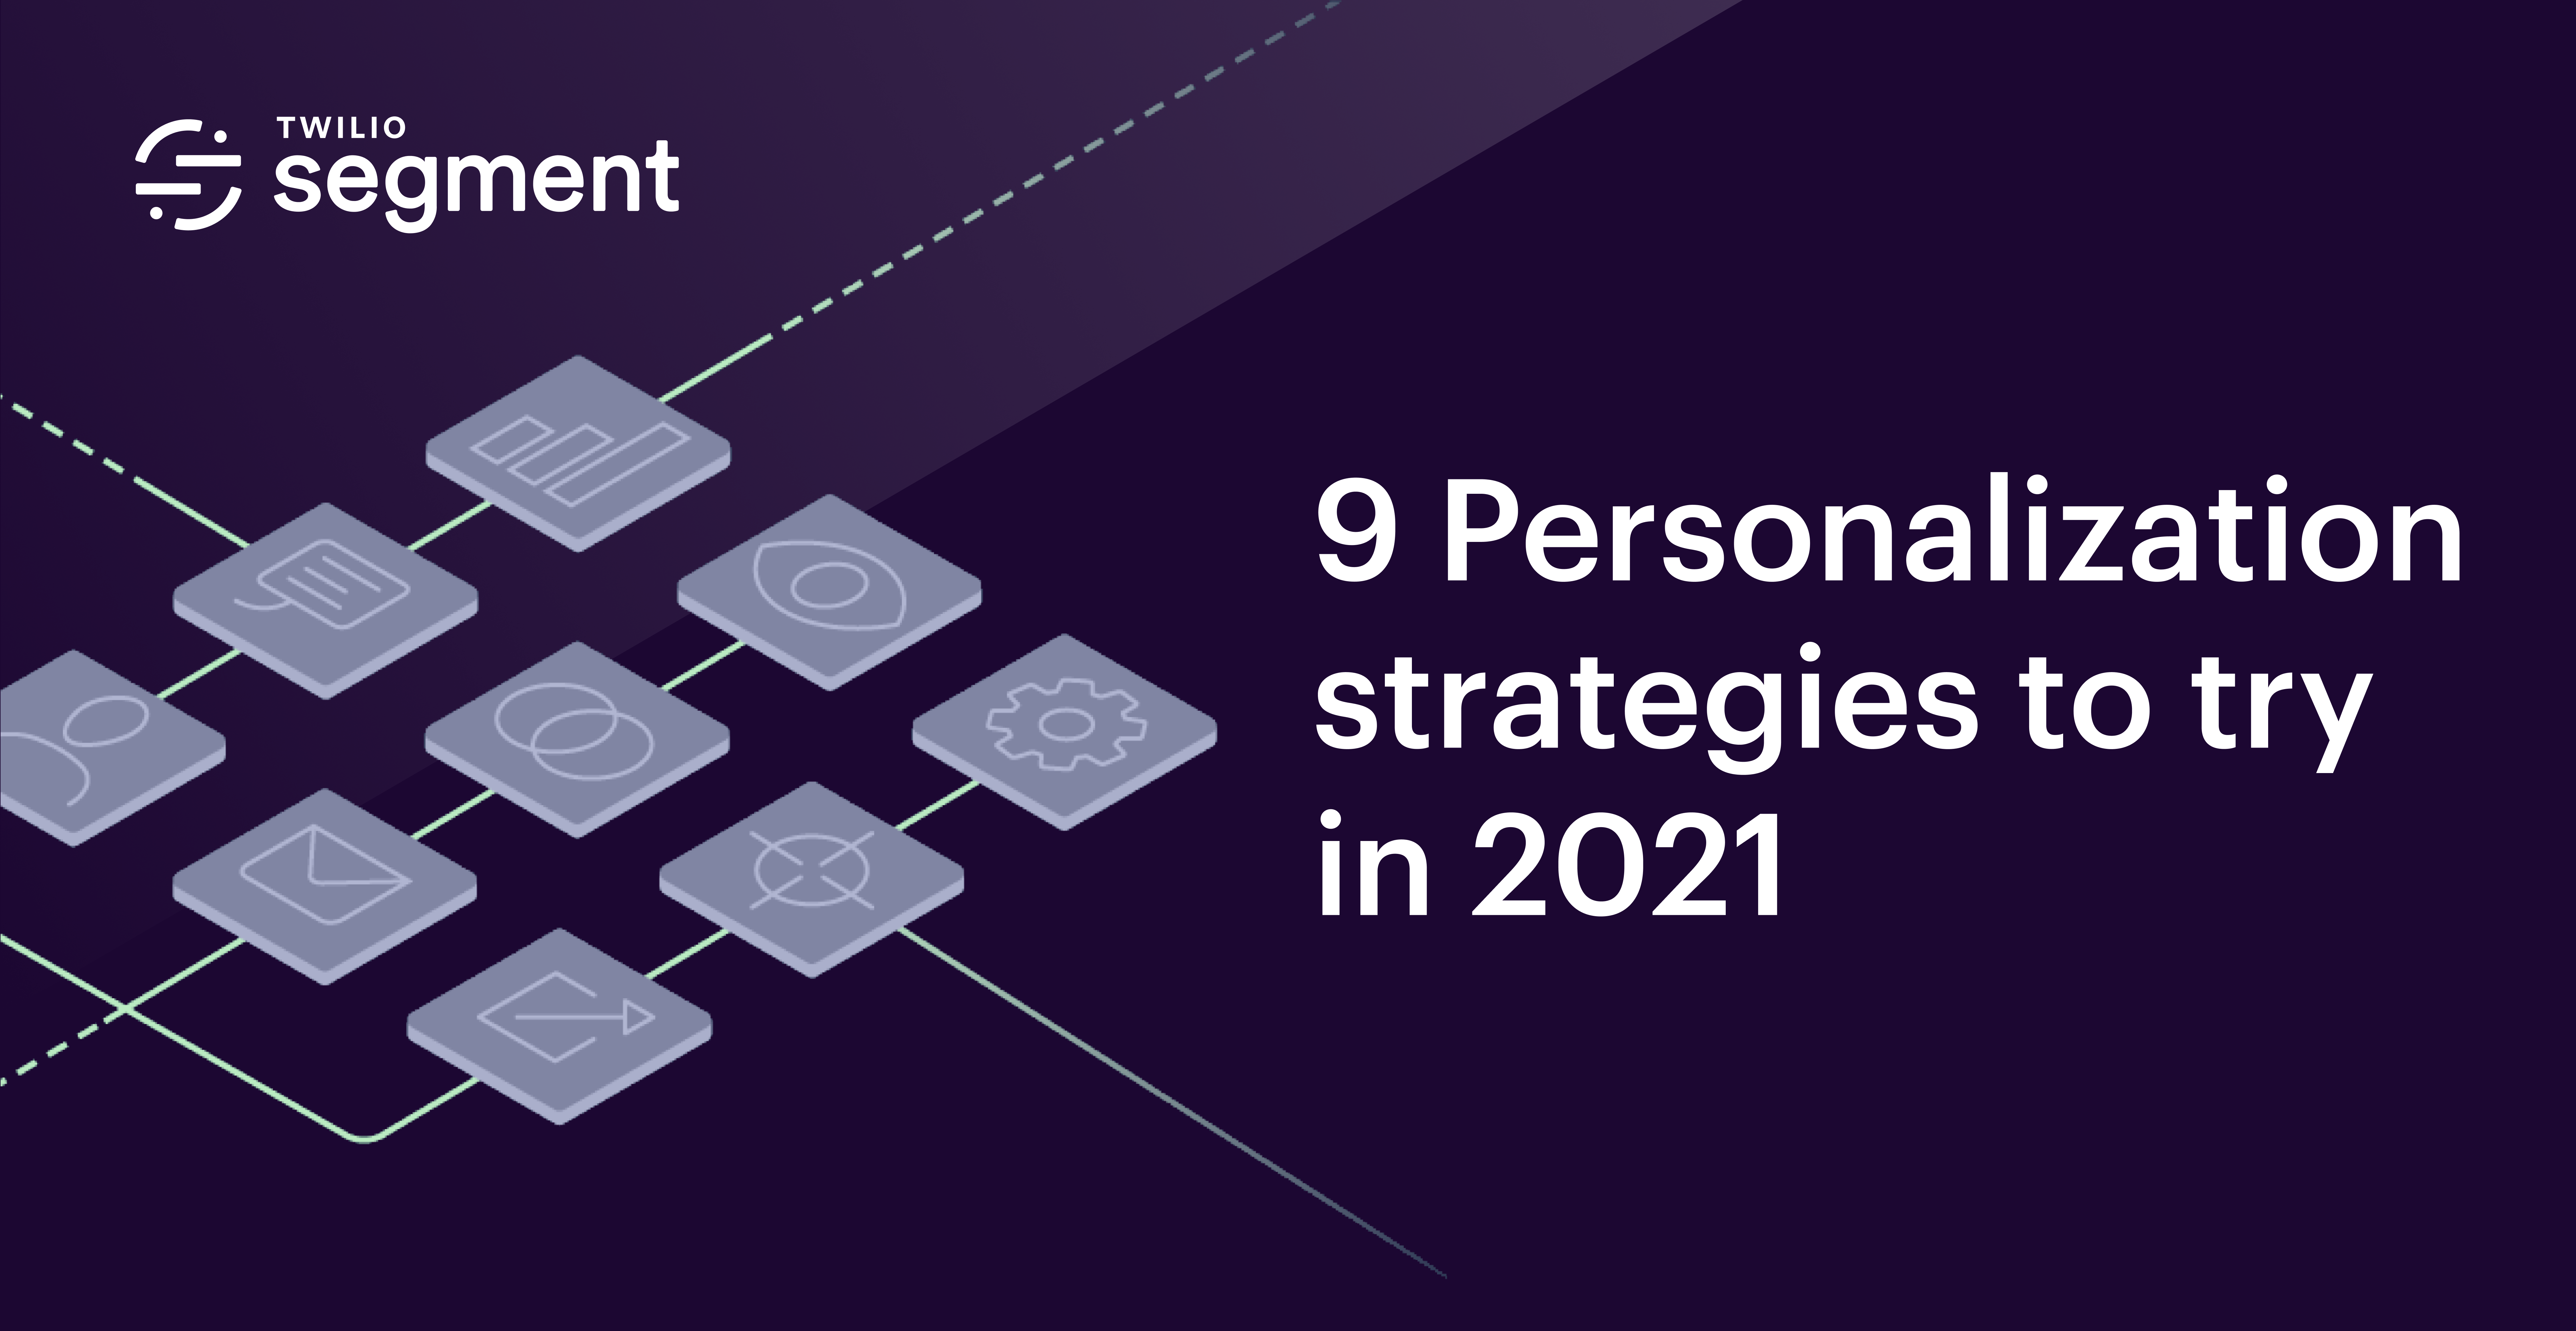 9 personalization strategies to try in 2021